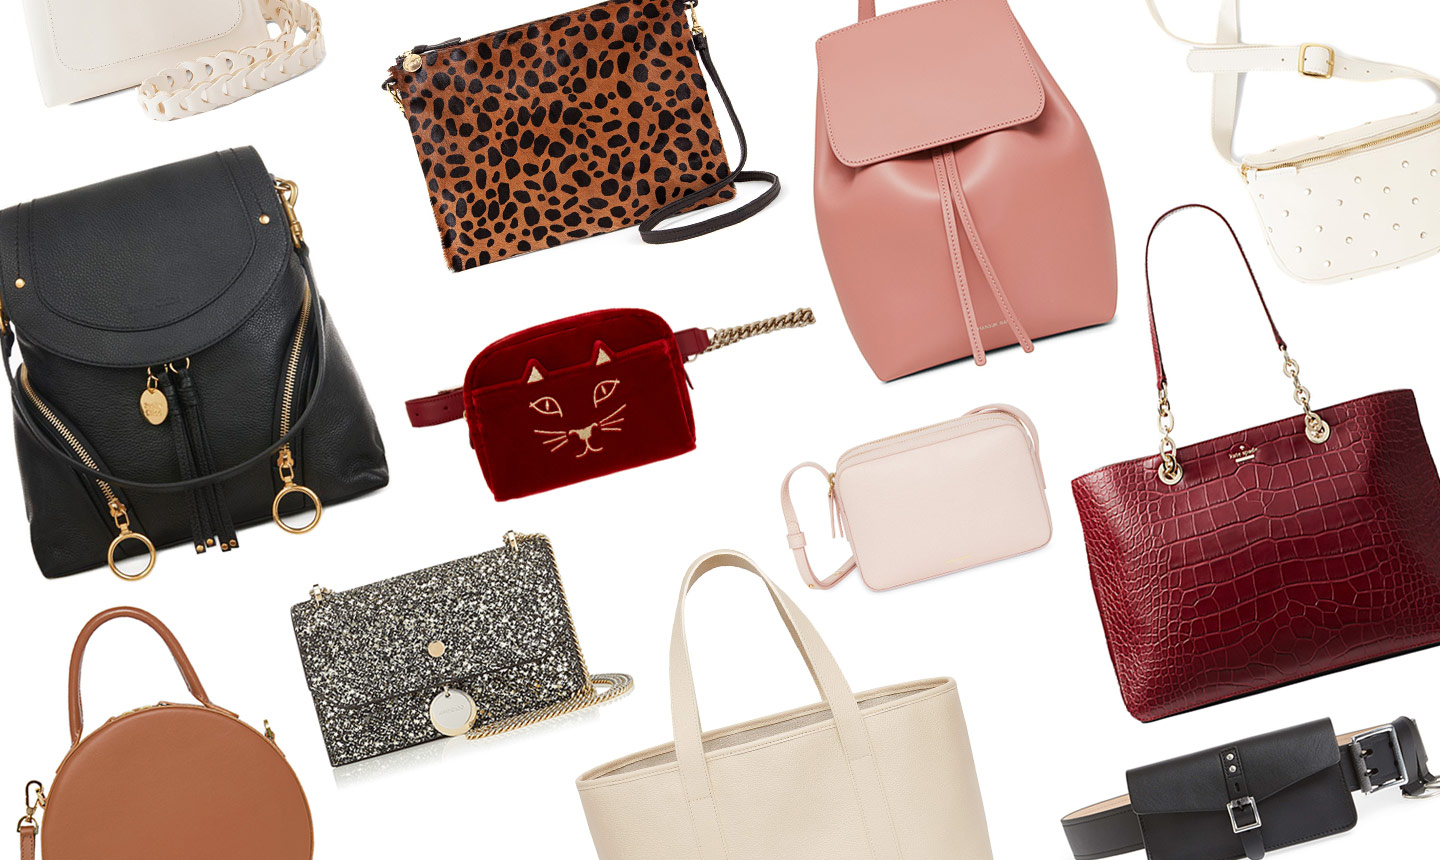 purse-onality test: what your bag says about you